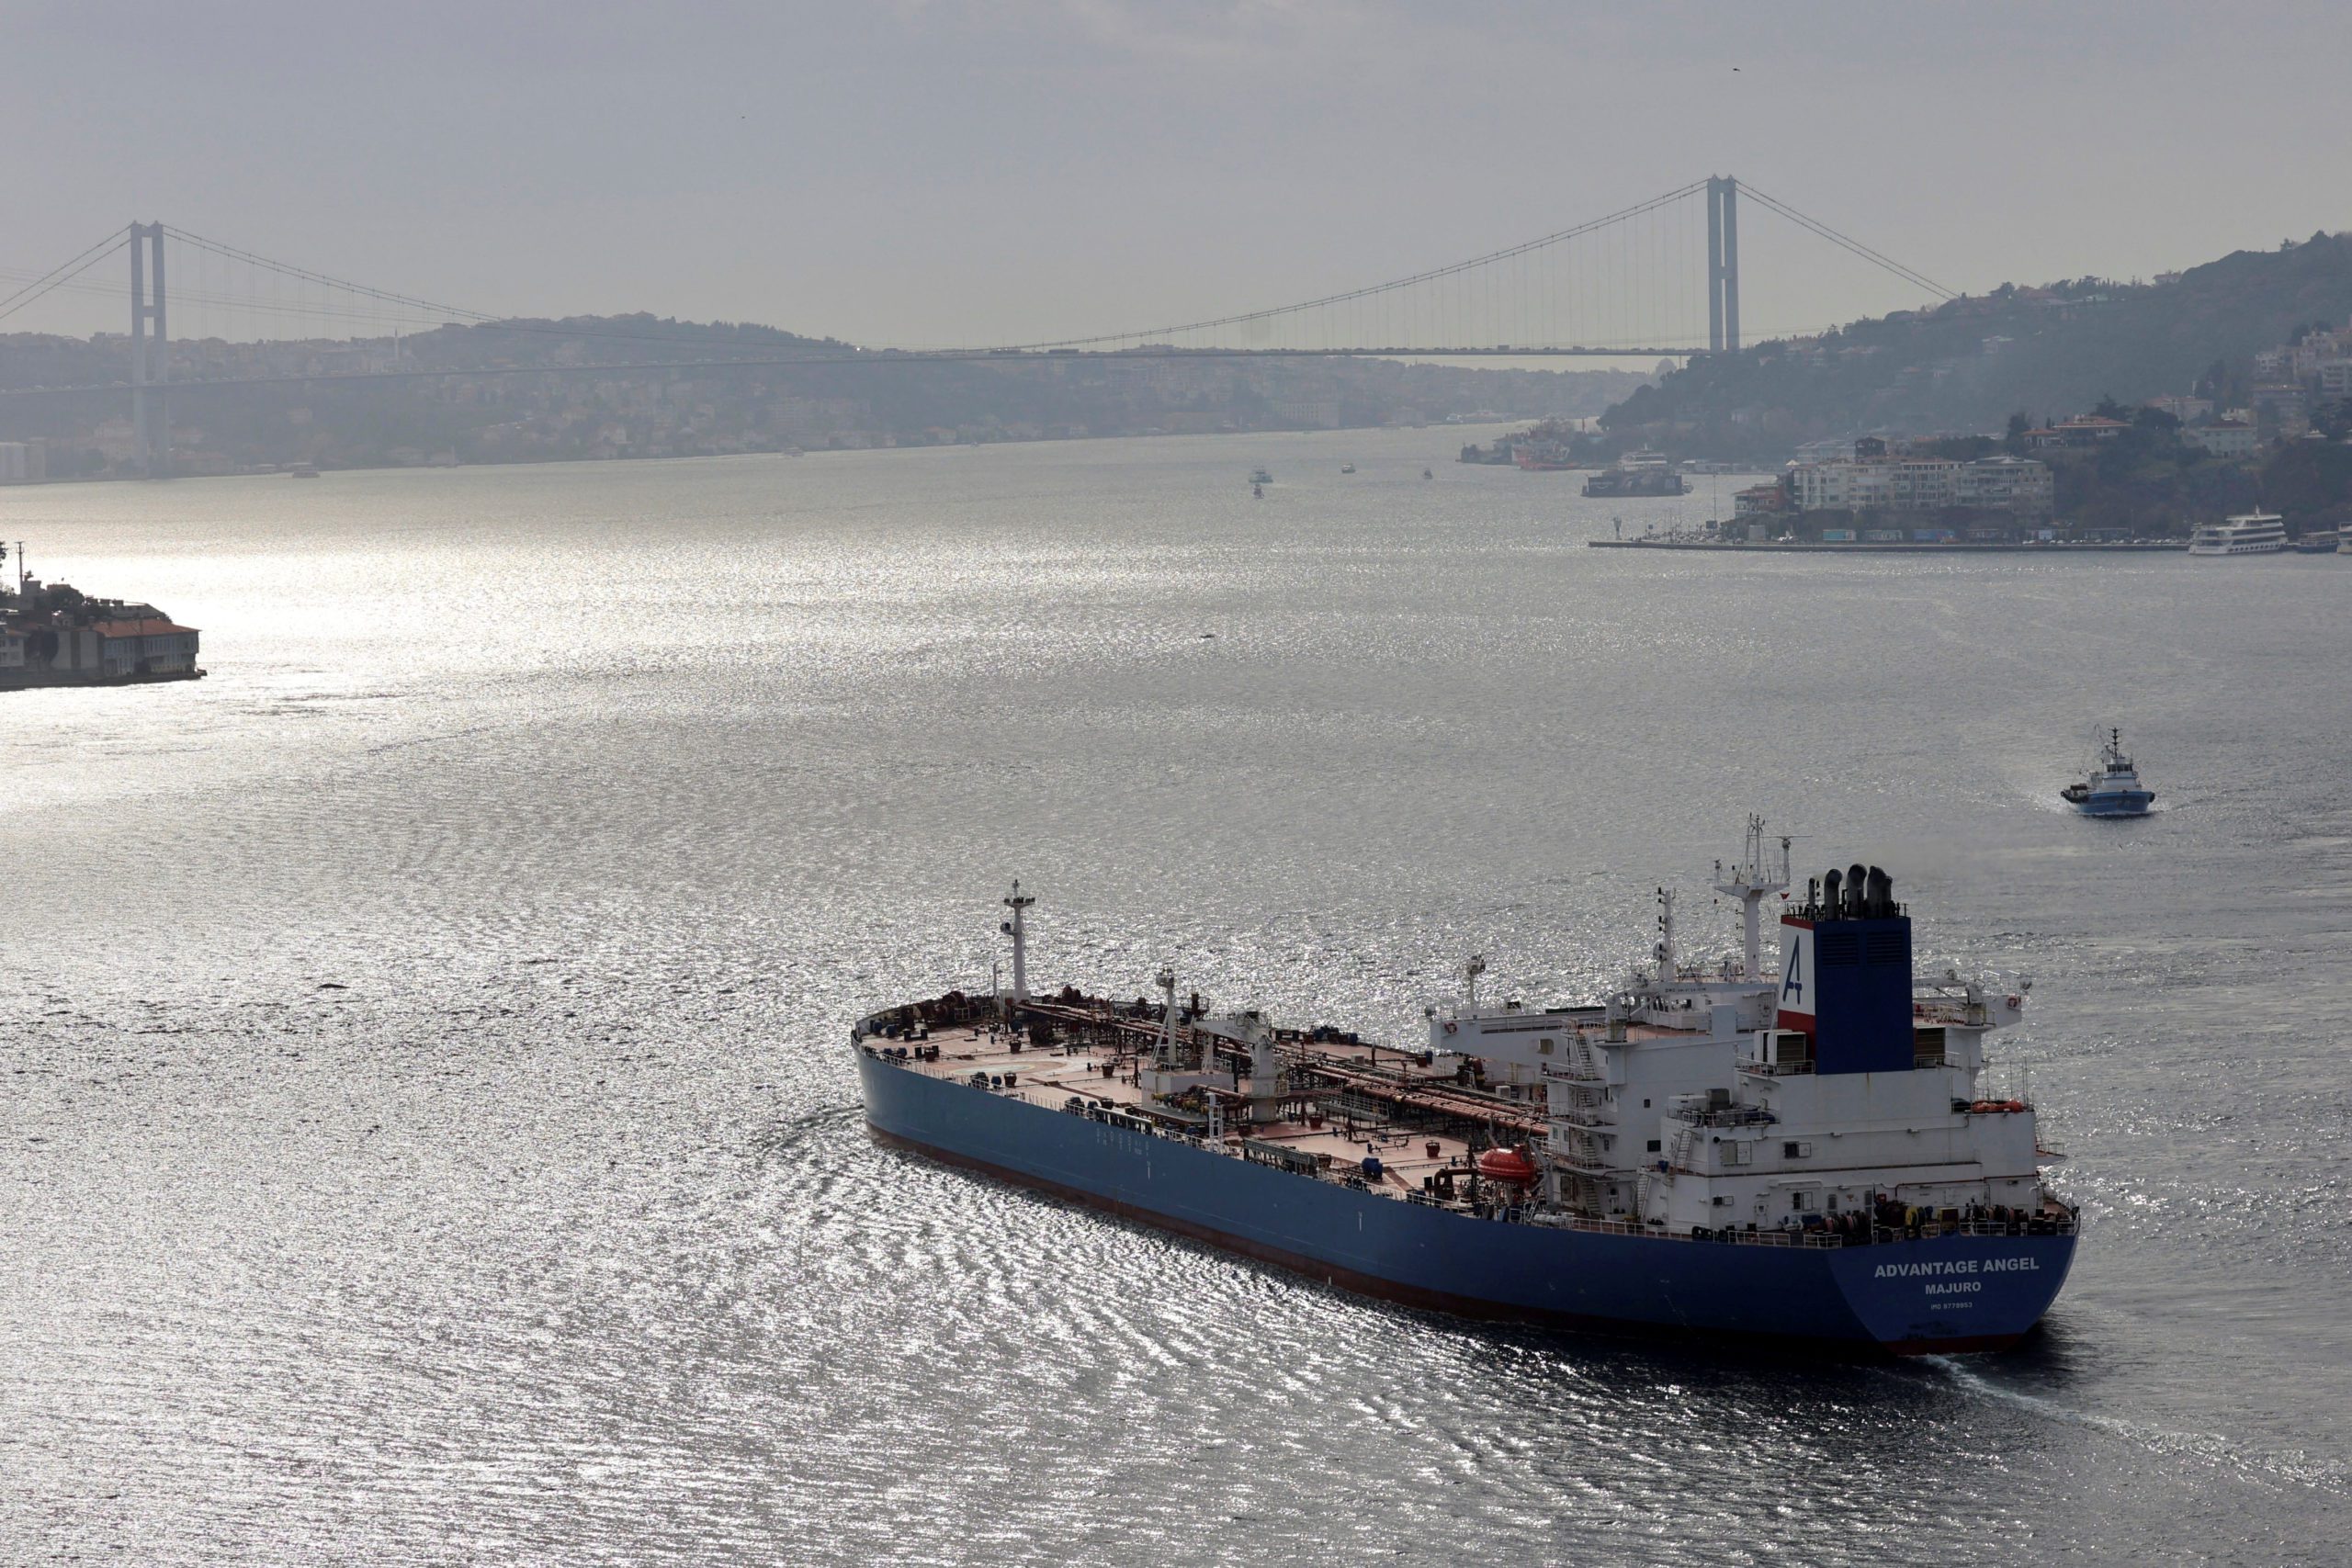 Oil Supertanker Rates Surge as Cargoes From Mideast Climb